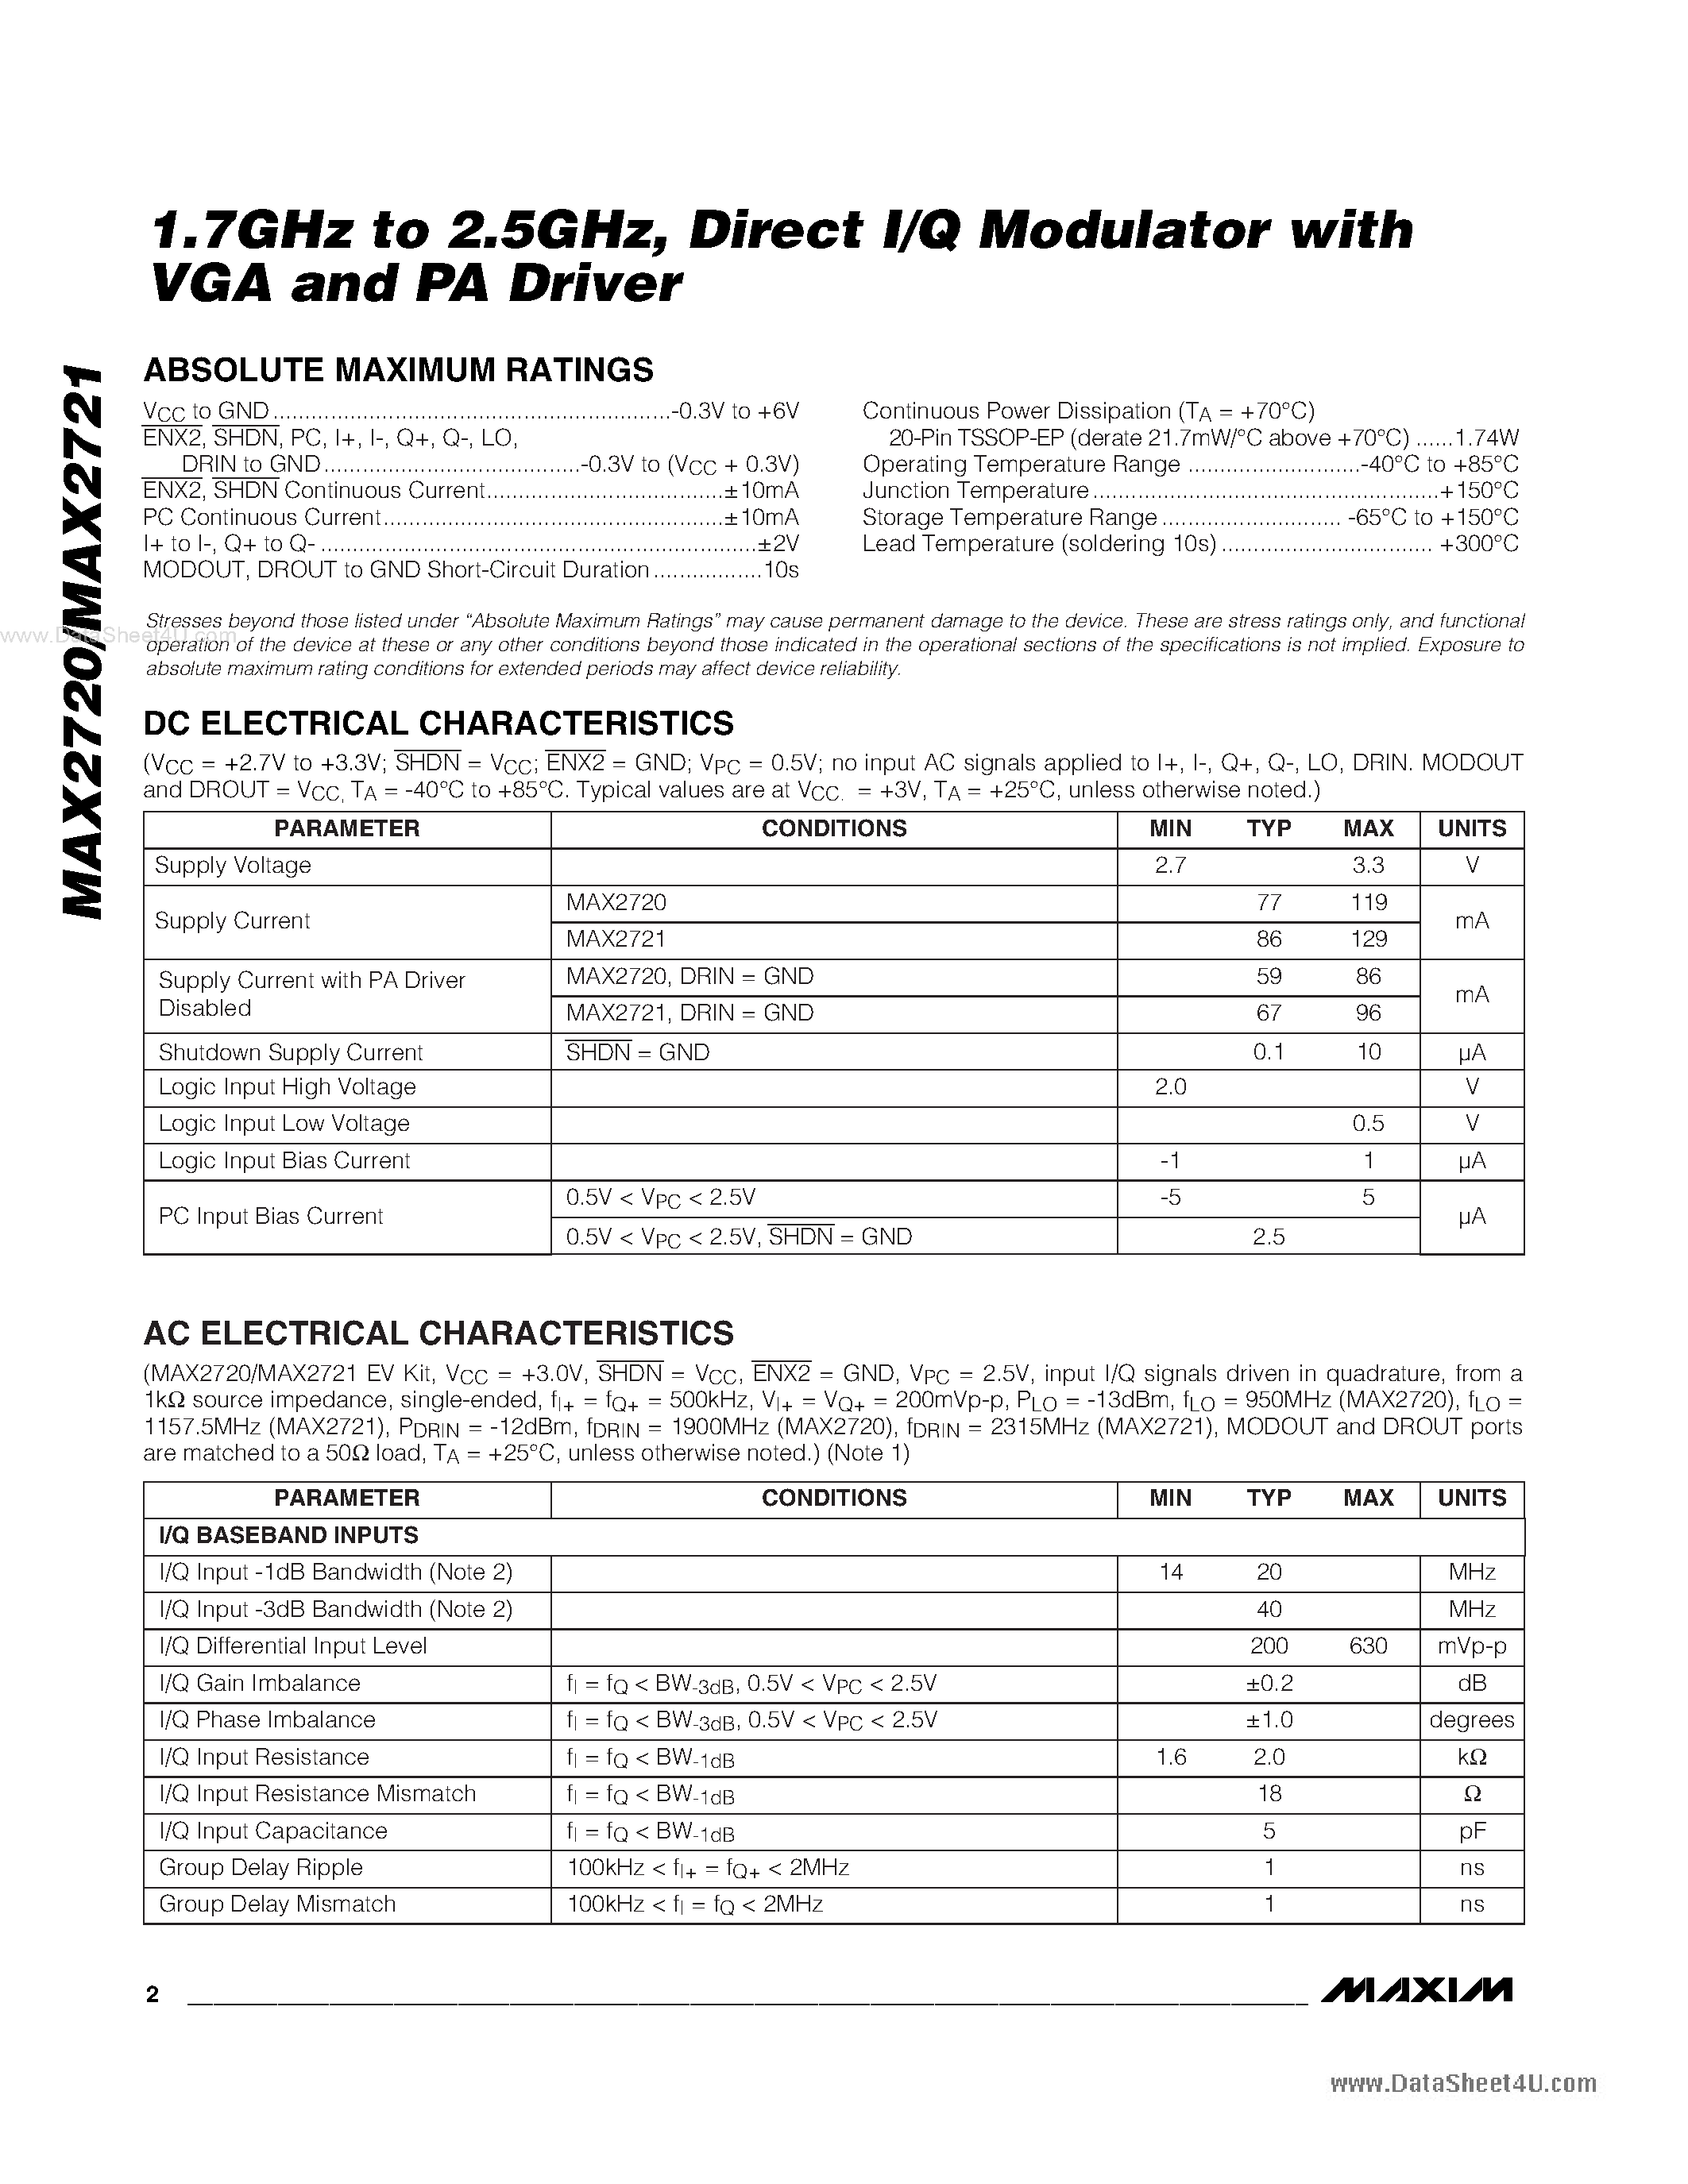 Datasheet MAX2721 - 1.7GHz to 2.5GHz / Direct I/Q Modulator with VGA and PA Driver page 2